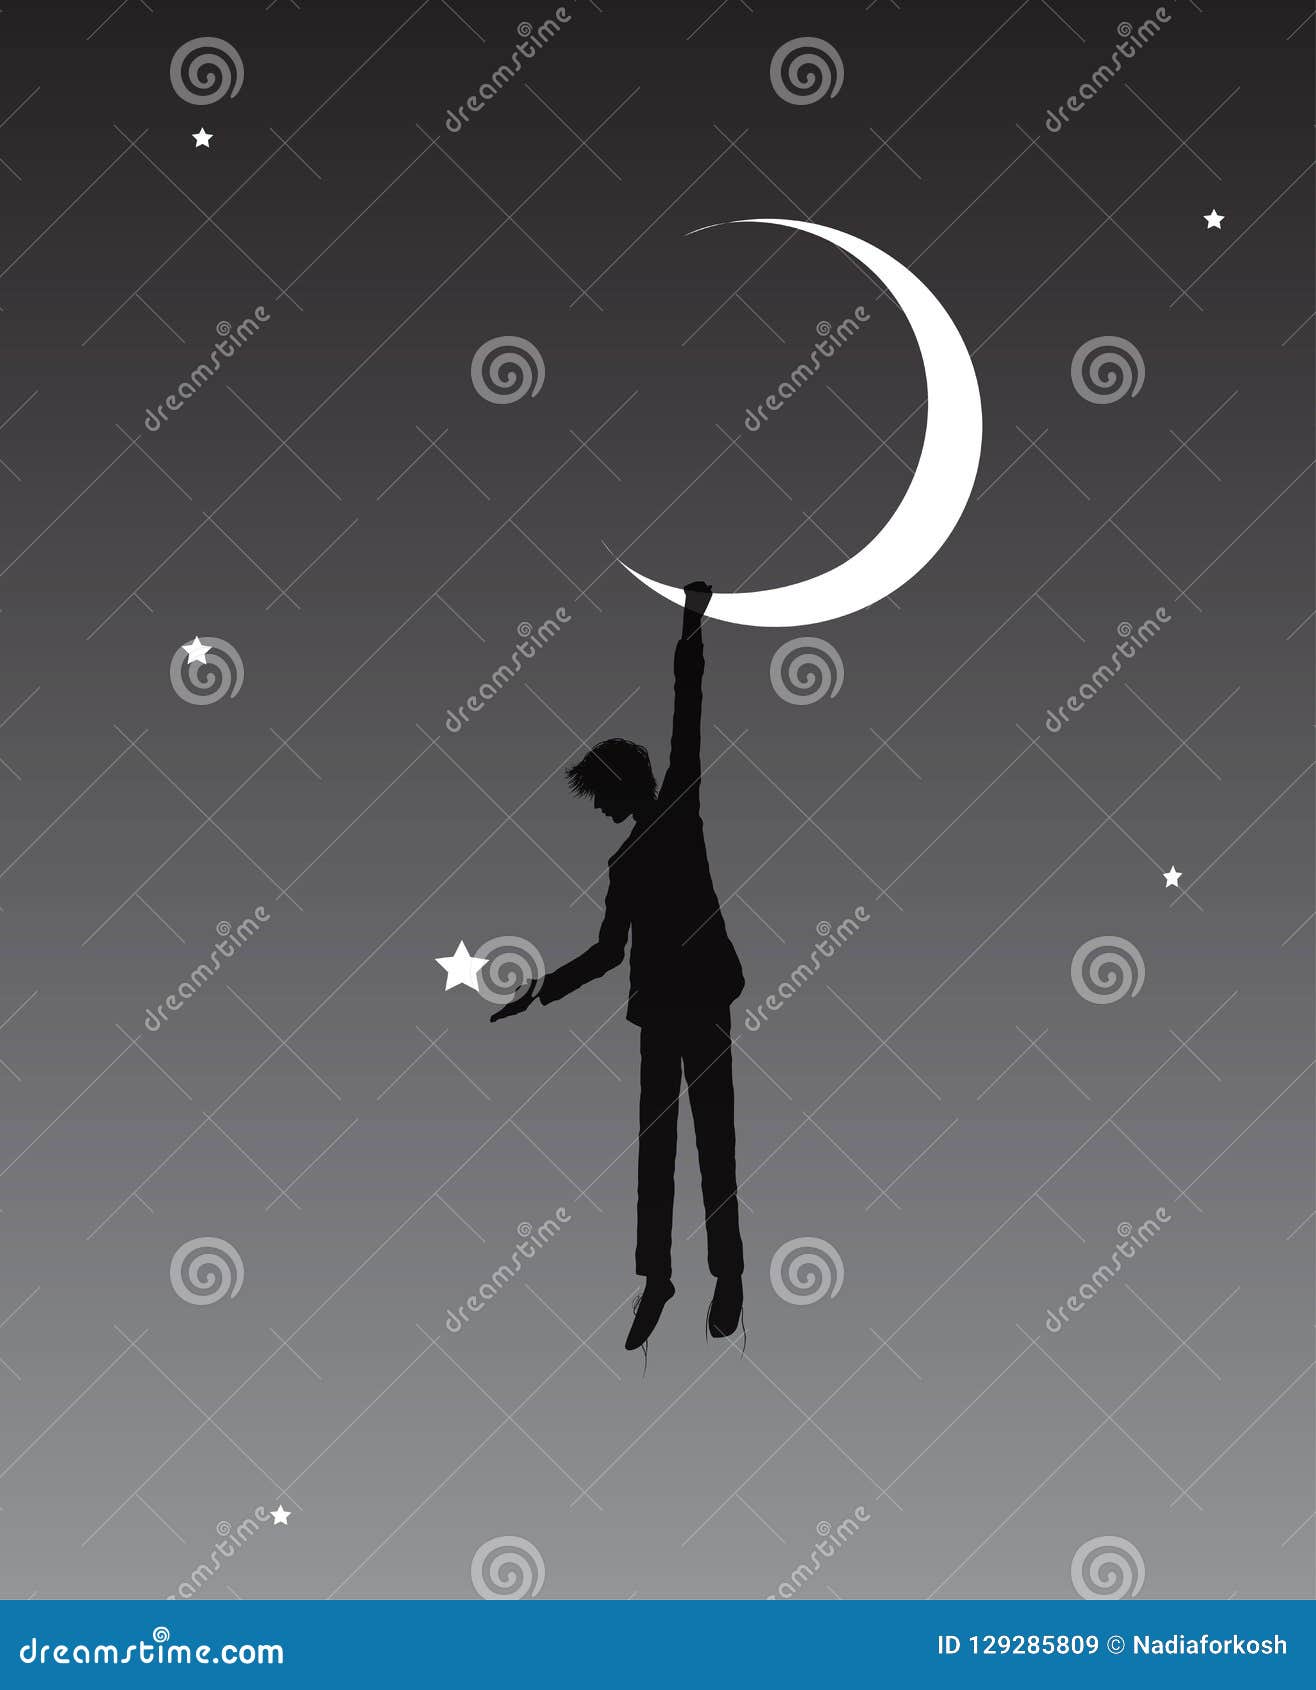 boy hanging on the moon, on the heavens, dream,